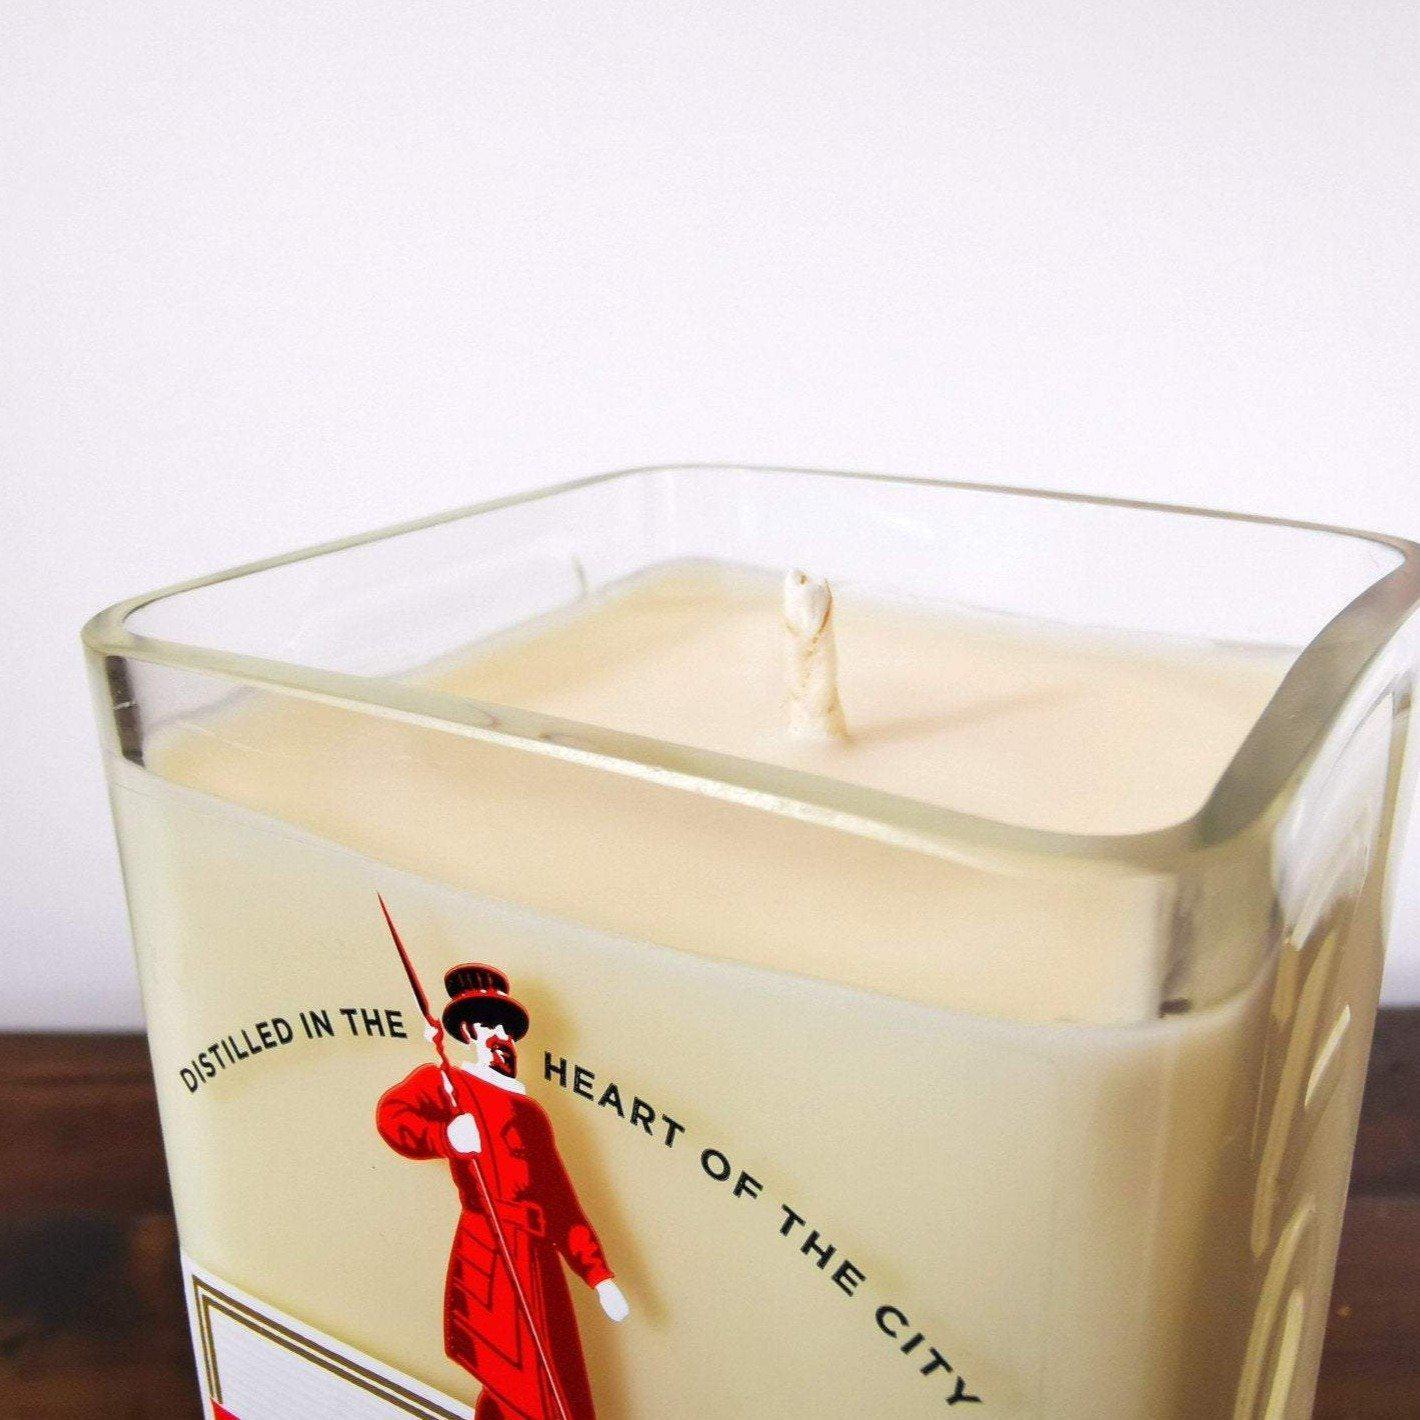 Beefeater Gin Bottle Candle Gin Bottle Candles Adhock Homeware